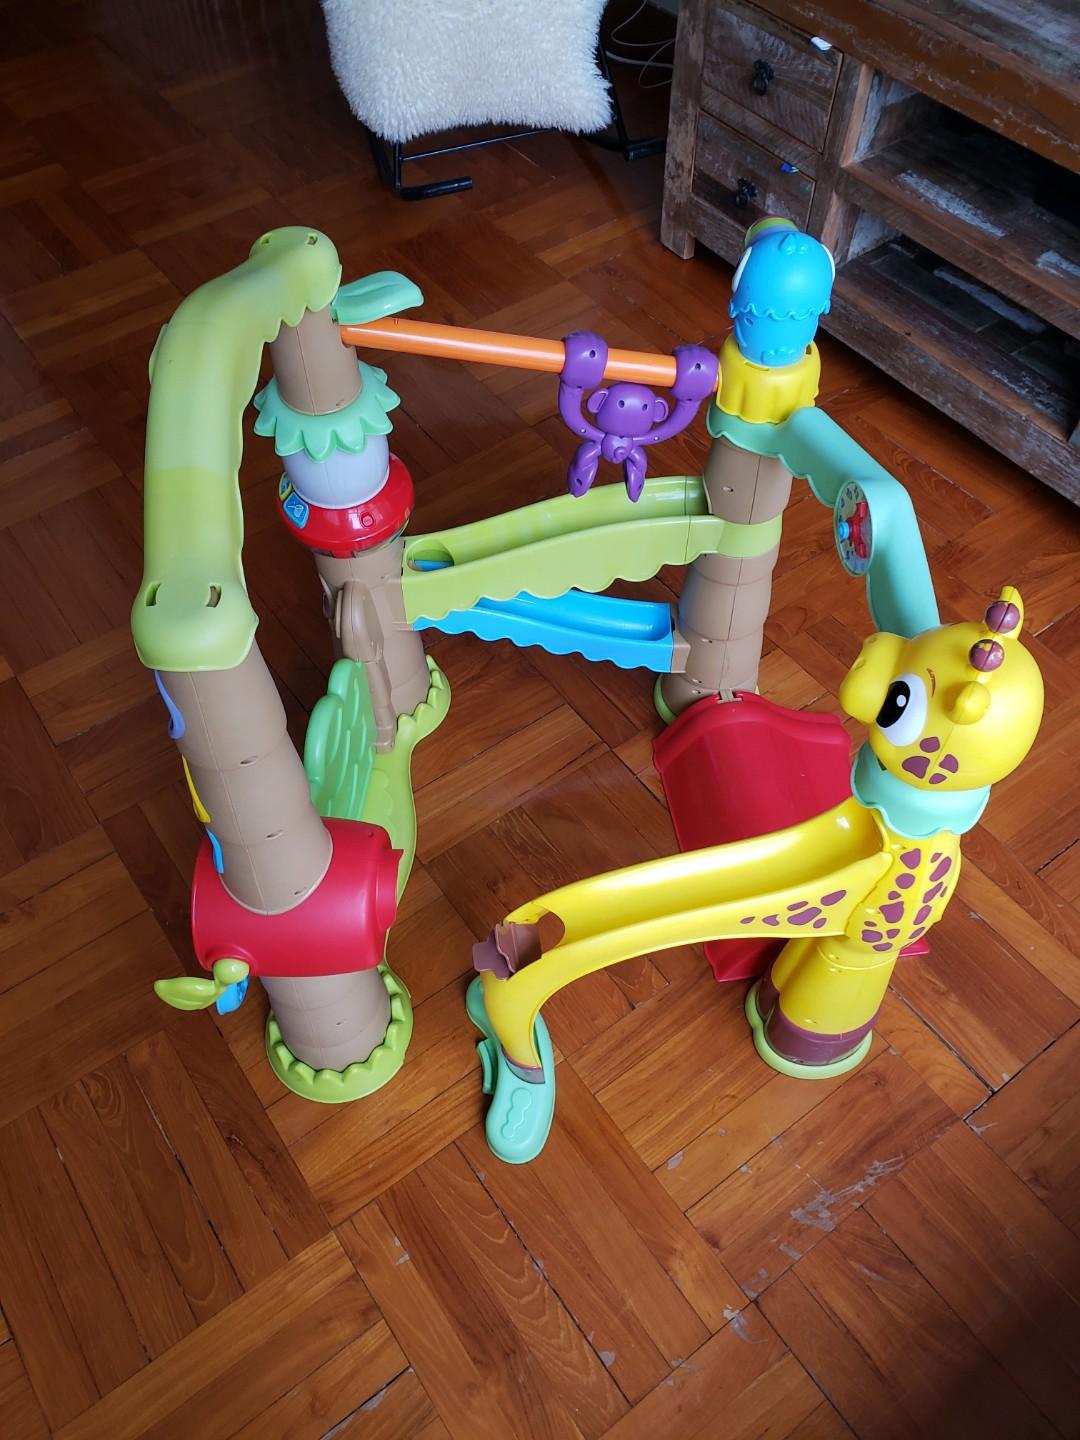 little tikes light n go activity garden treehouse replacement parts